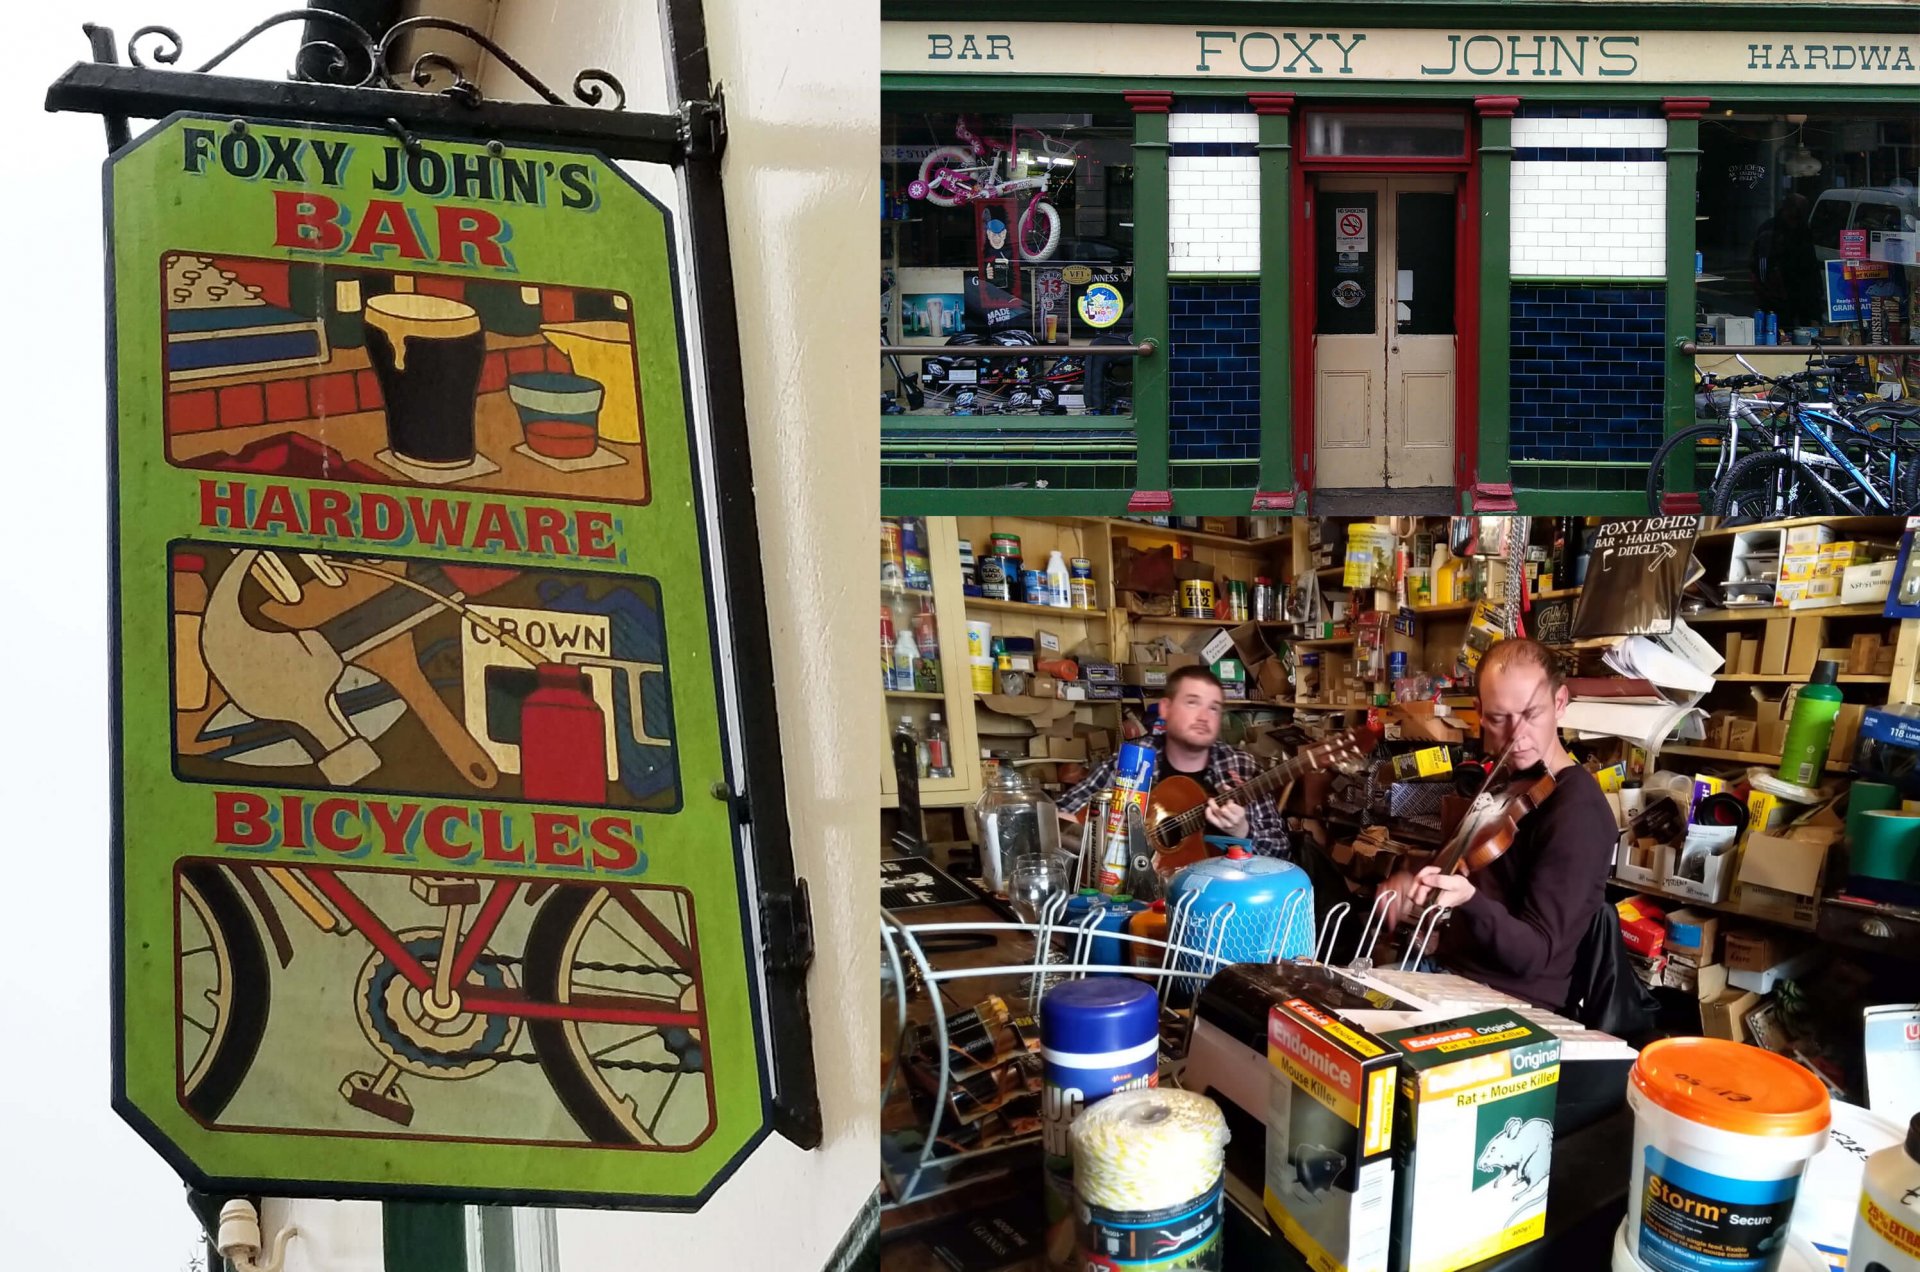 Collage of scenes from Foxy John's pub in Dingle, Ireland